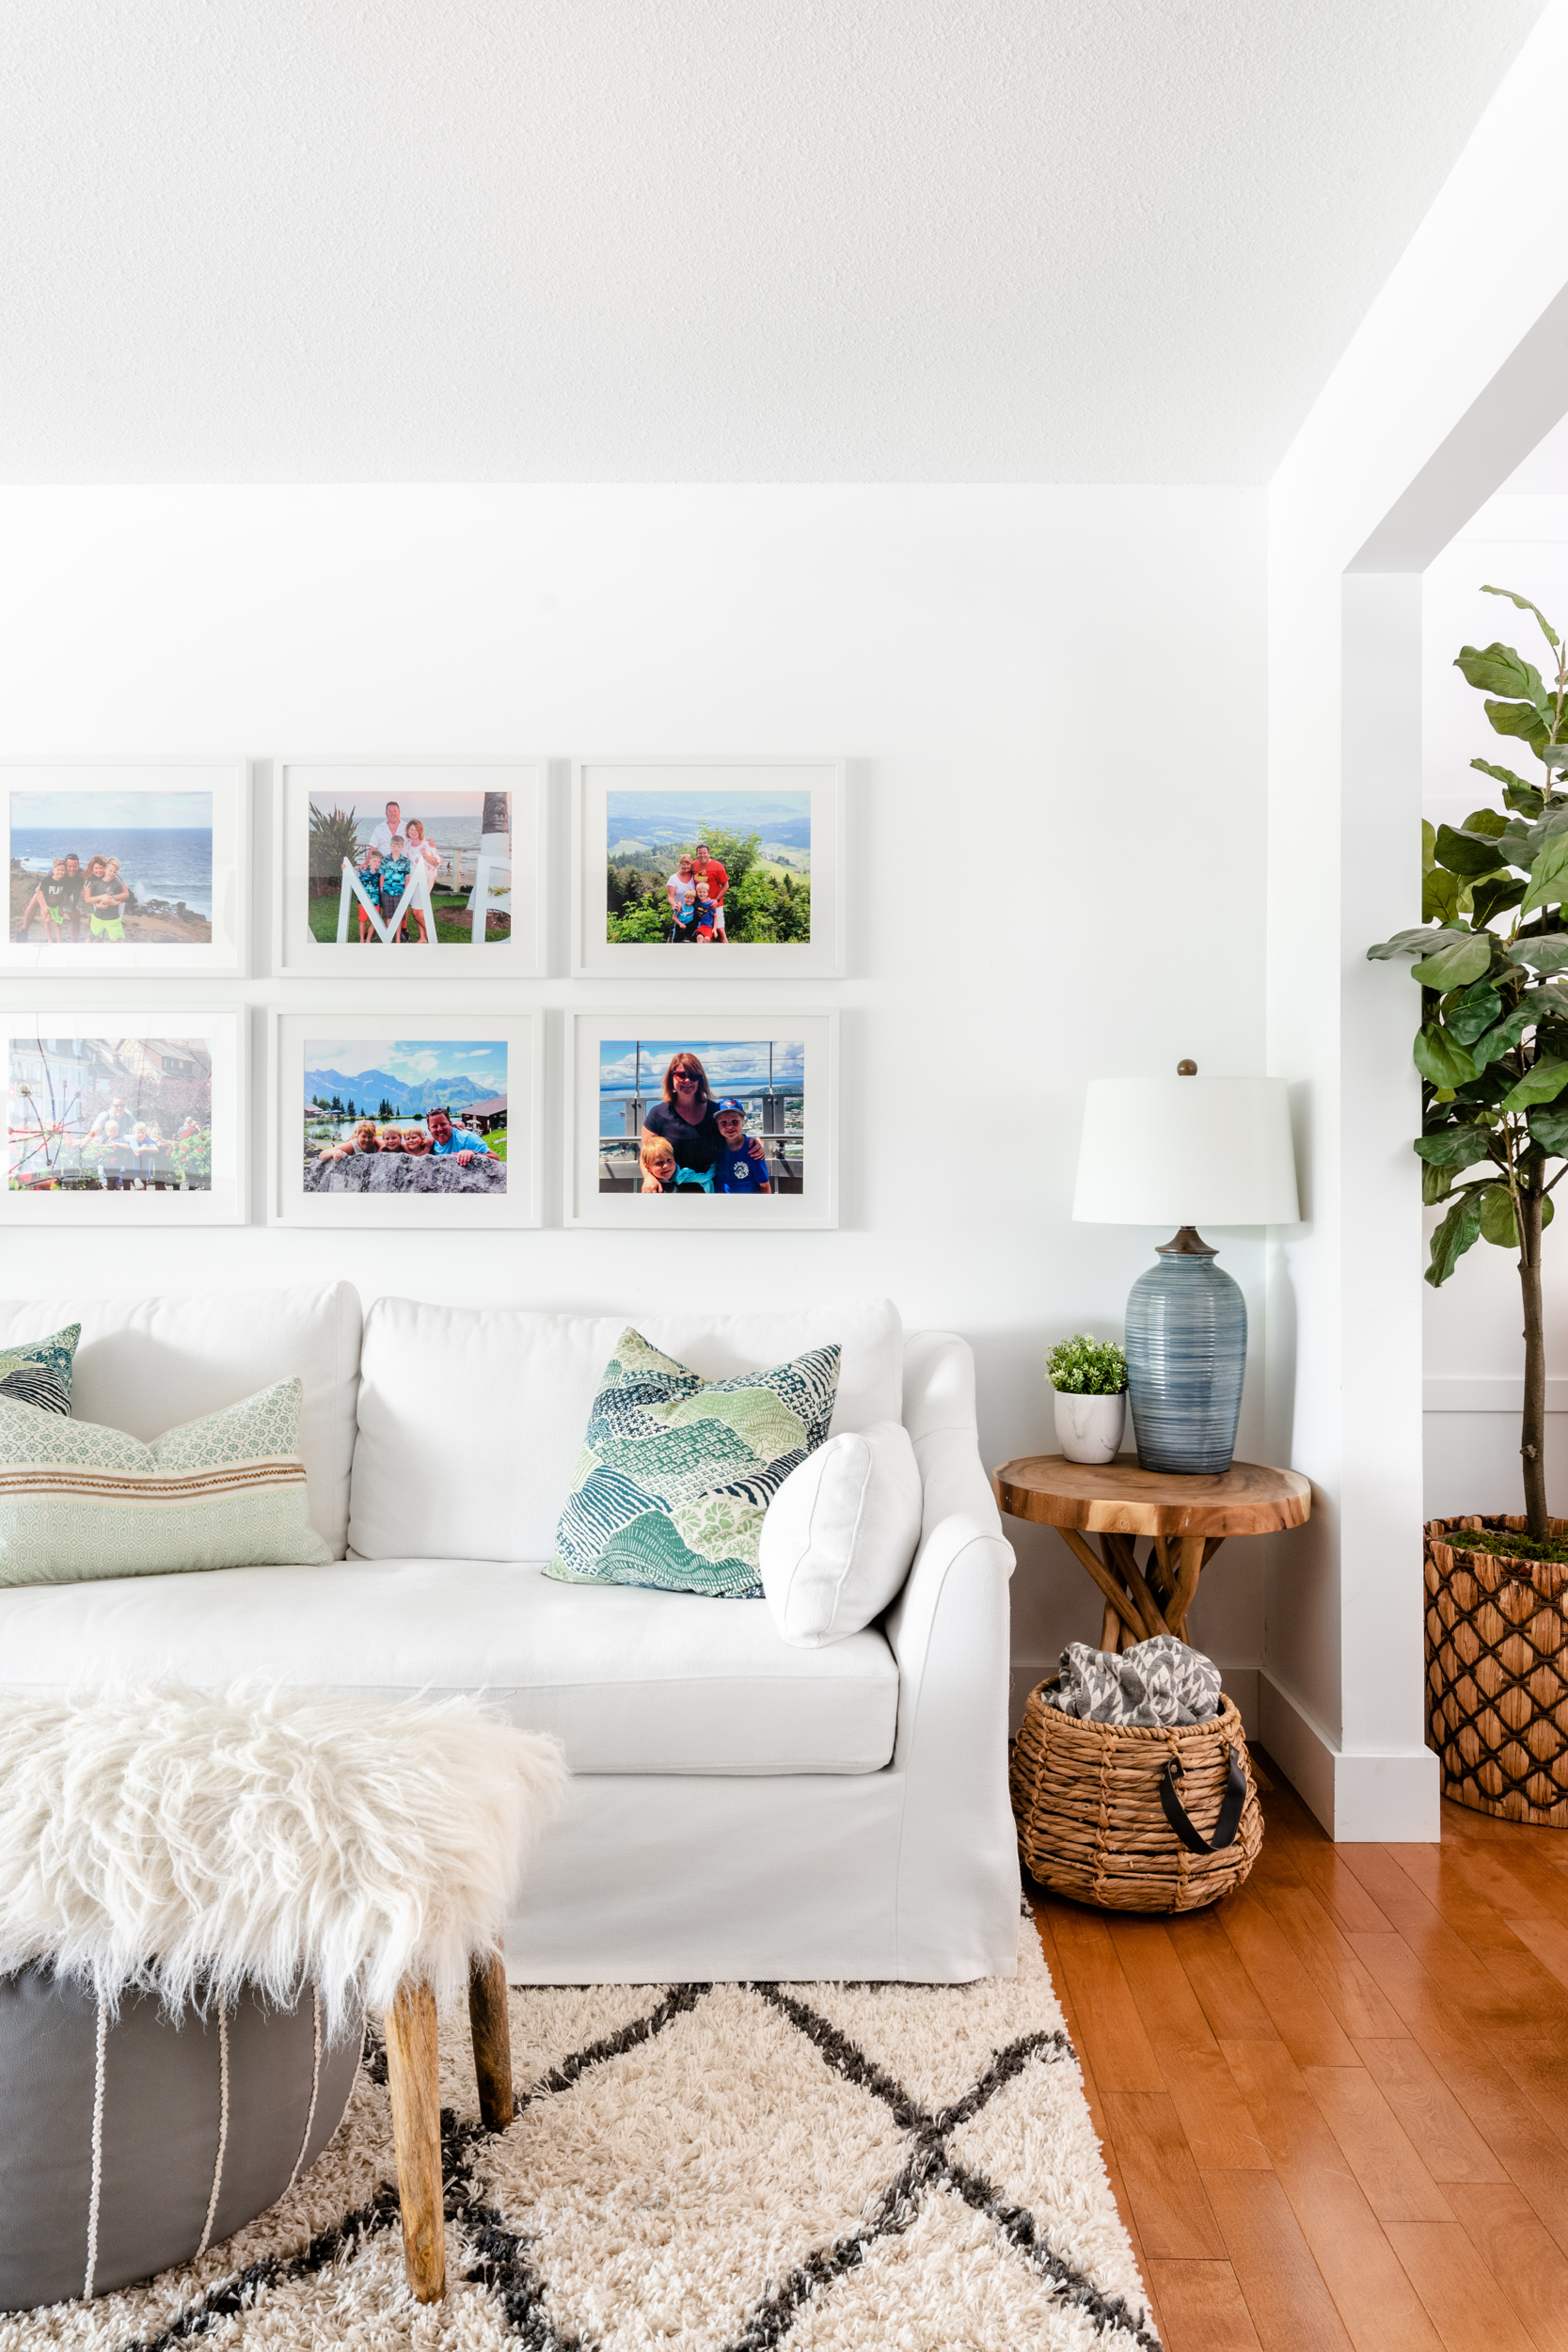 A corner of a family room with white walls, framed family photographs, and an Ikea Farlov white slipcovered sofa